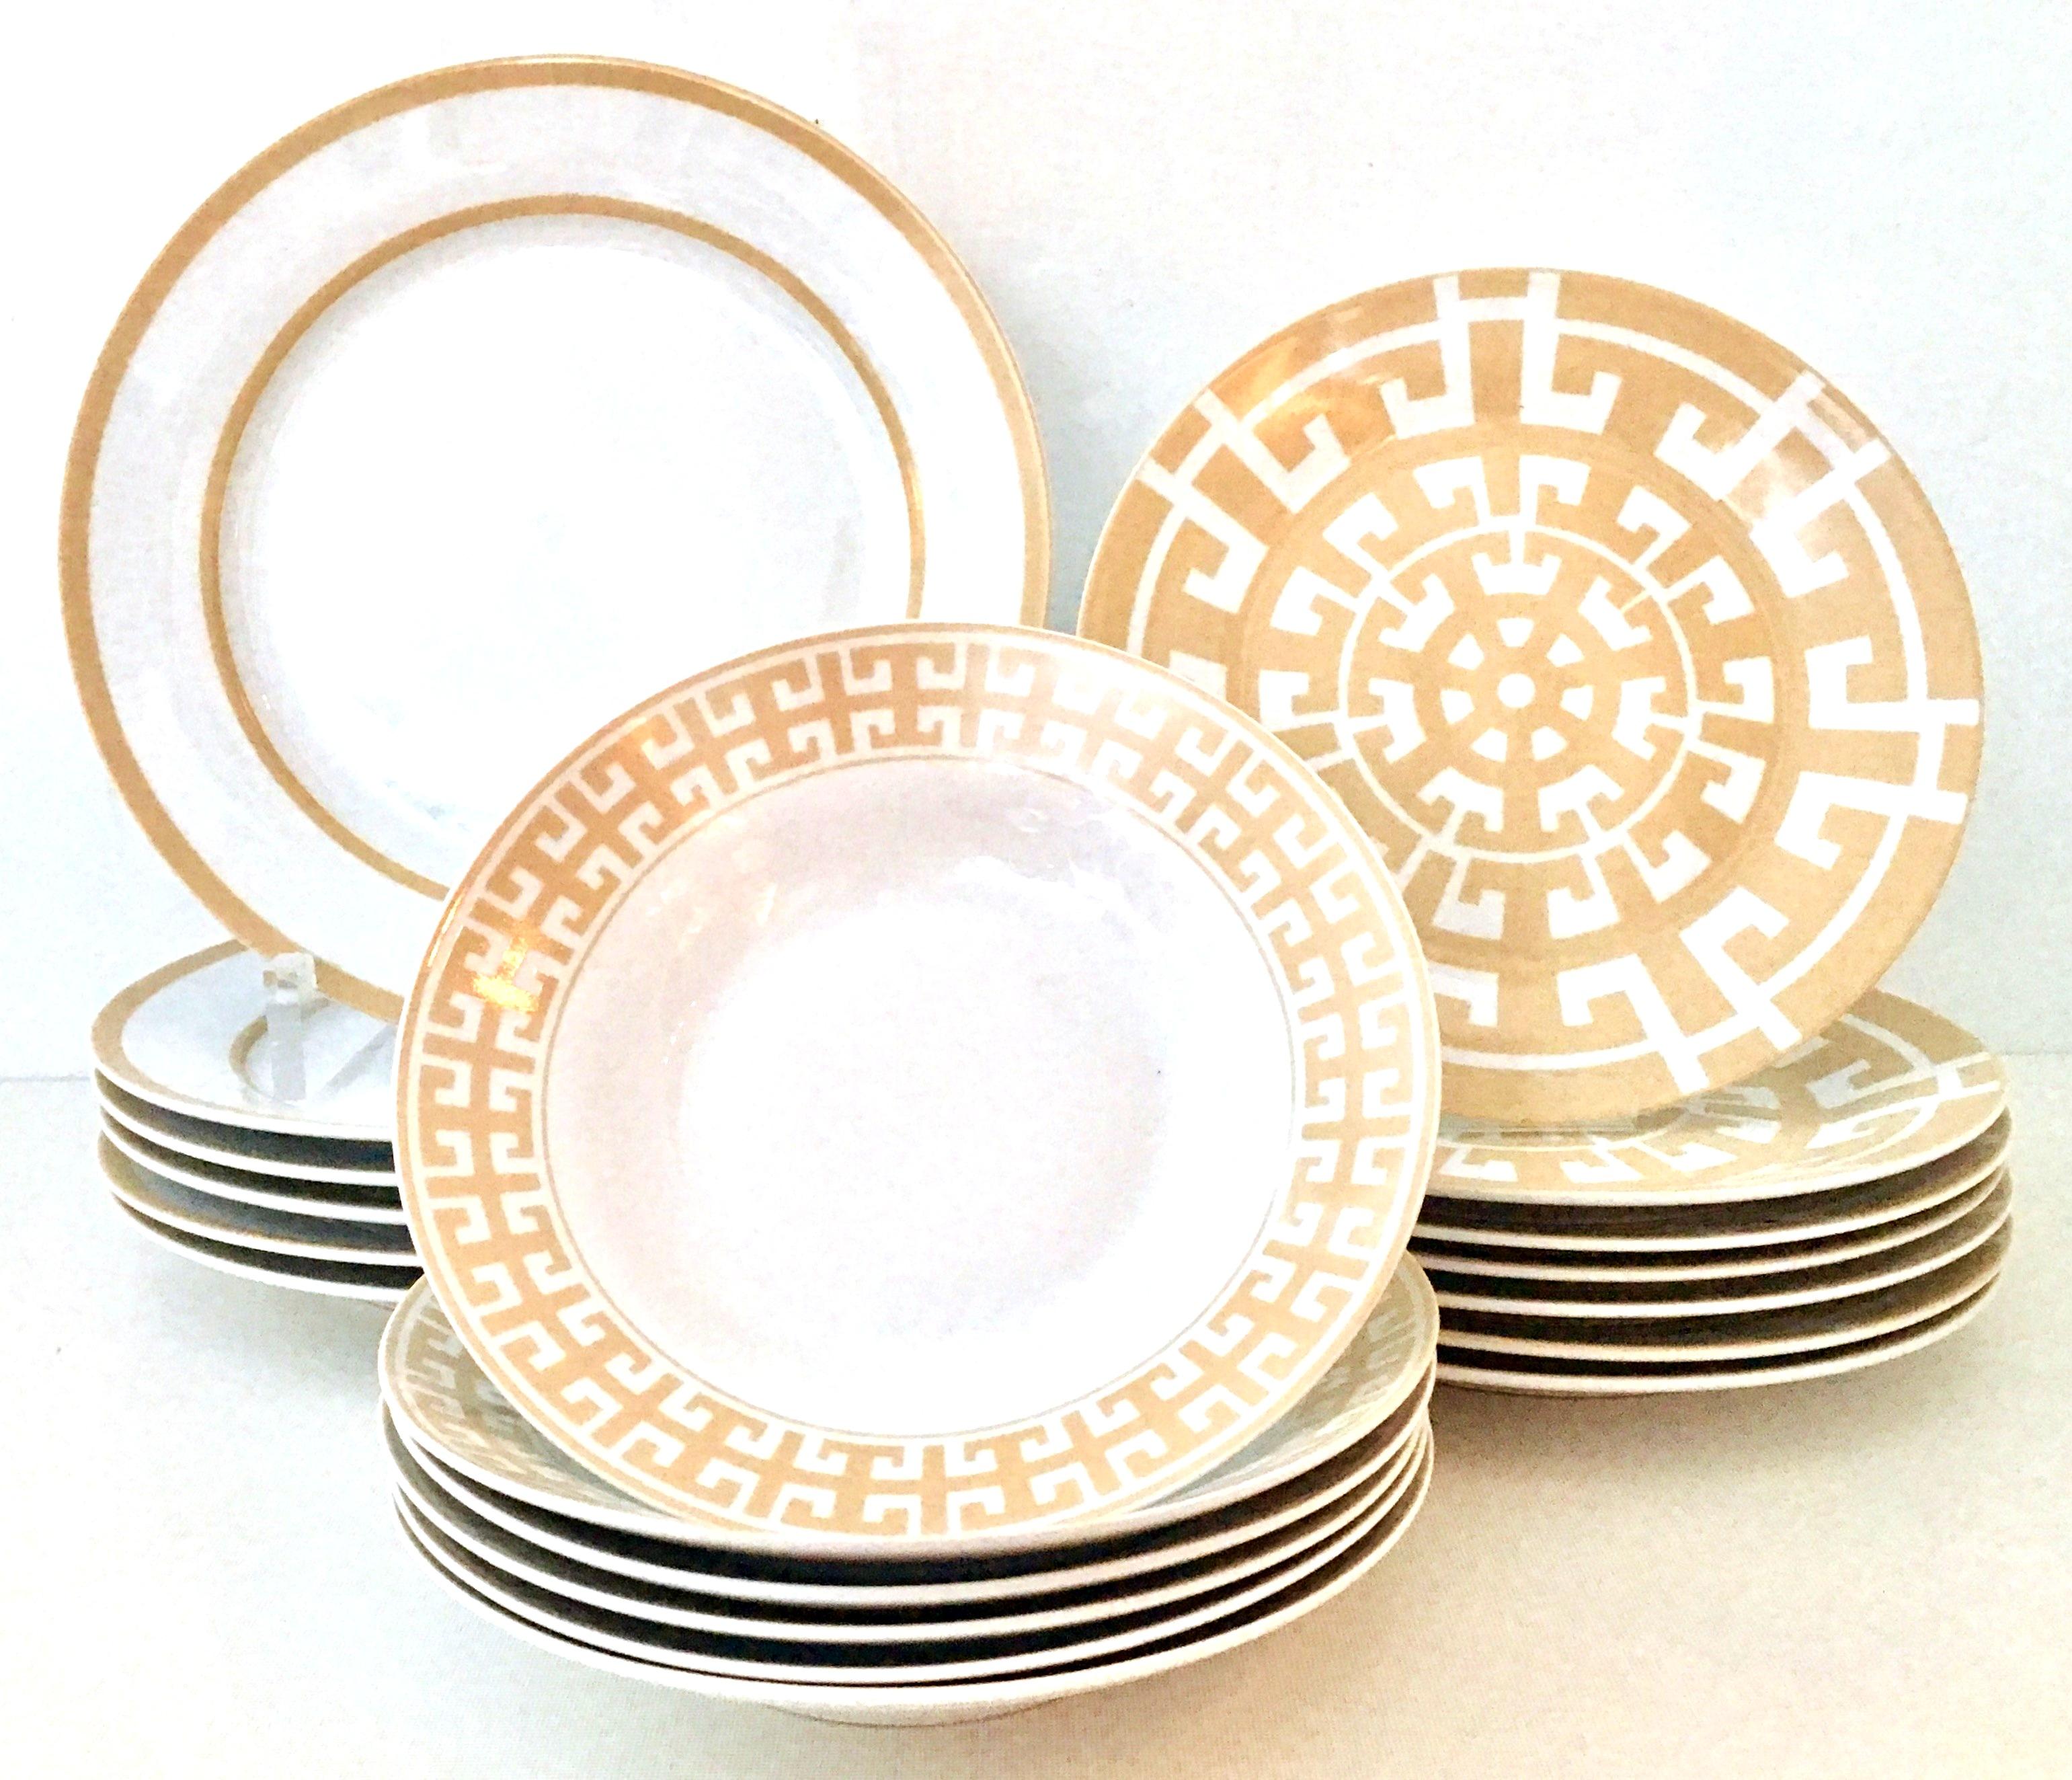 21st Century & New Modern Hermes Style geometric ceramic dinnerware By, Colin Cowie.. This 20 piece set features a different camel and white color hue motif on each of the three pieces and includes, seven dinner plates, seven soup or cereal bowls